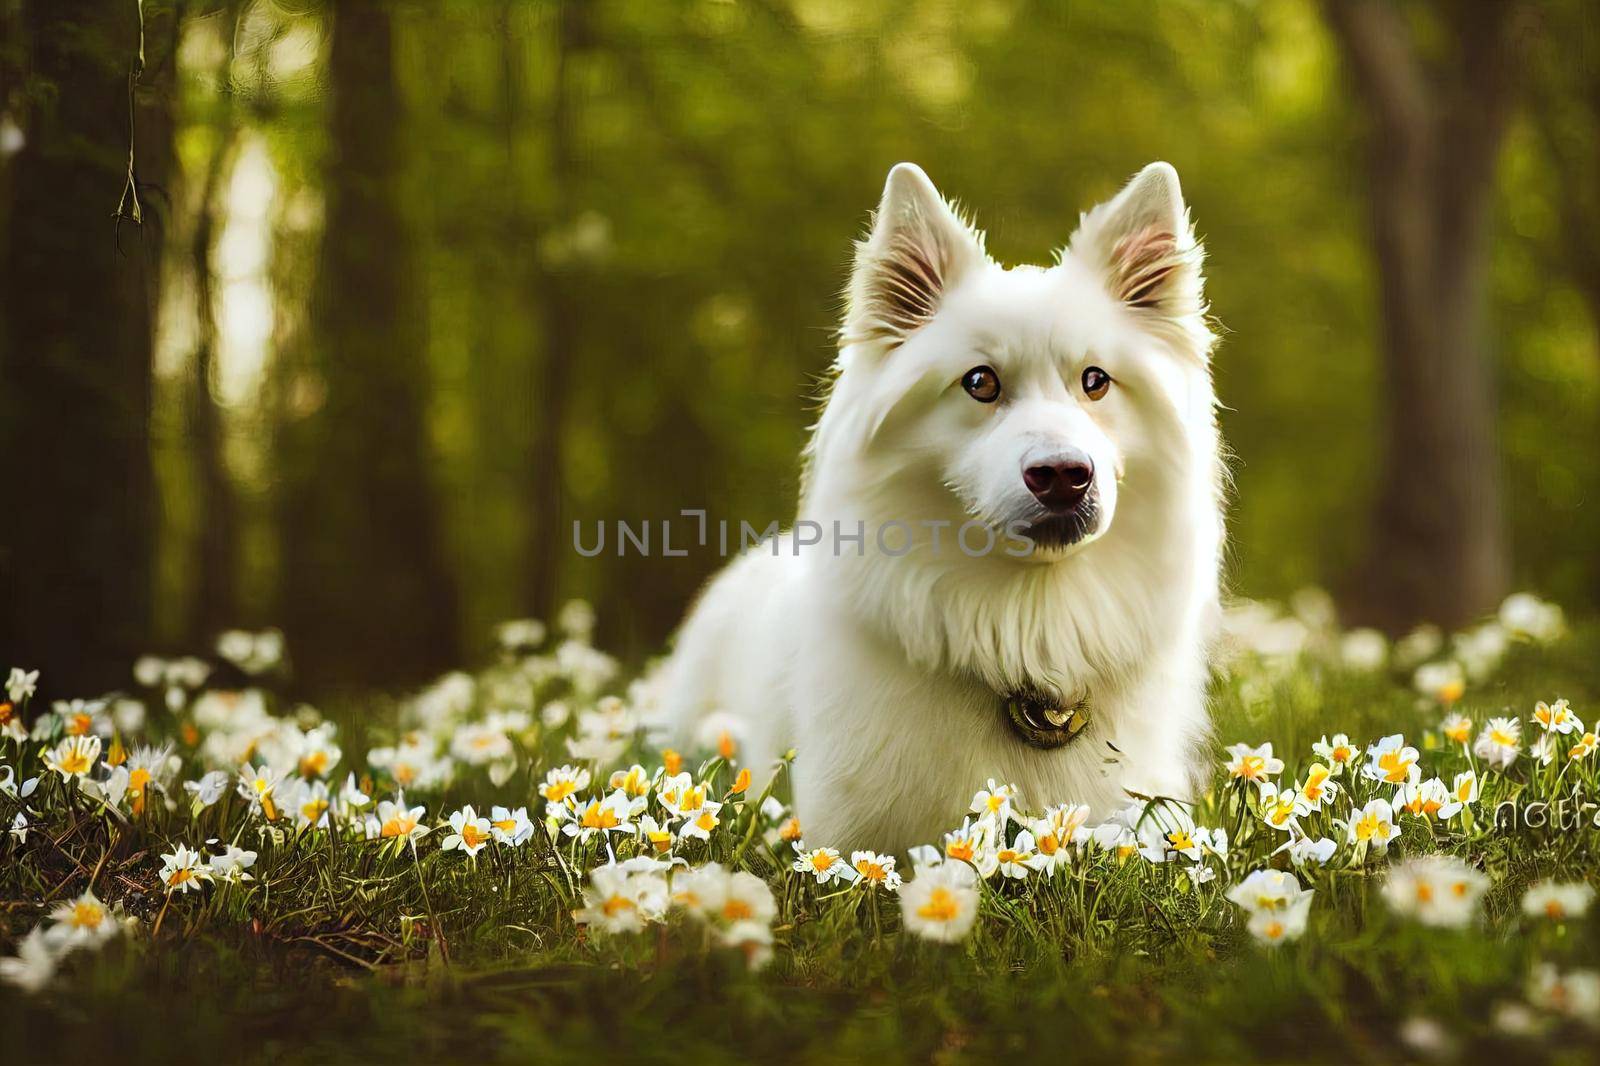 Adorable white dog sitting among beautiful blooming wood anemones by 2ragon